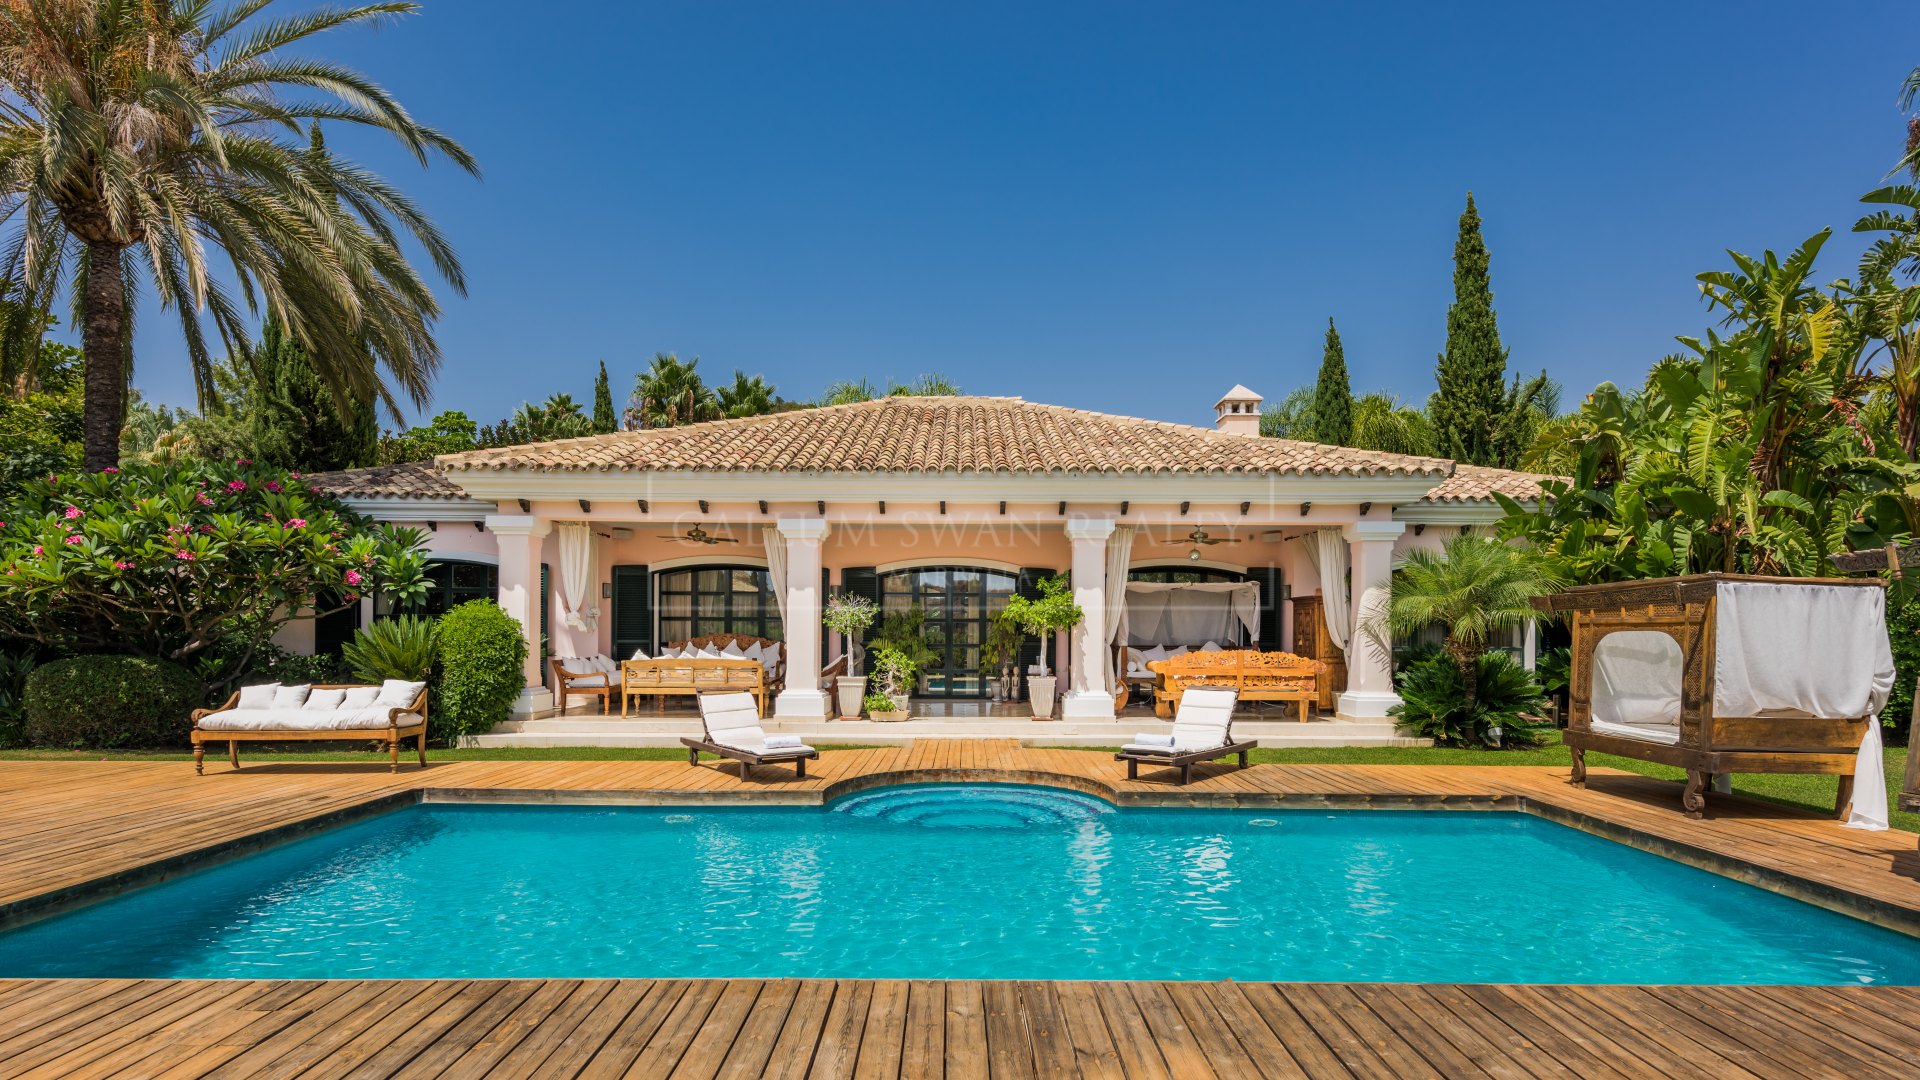 Elegant luxury family villa in Classic Andalusian style within a gated community